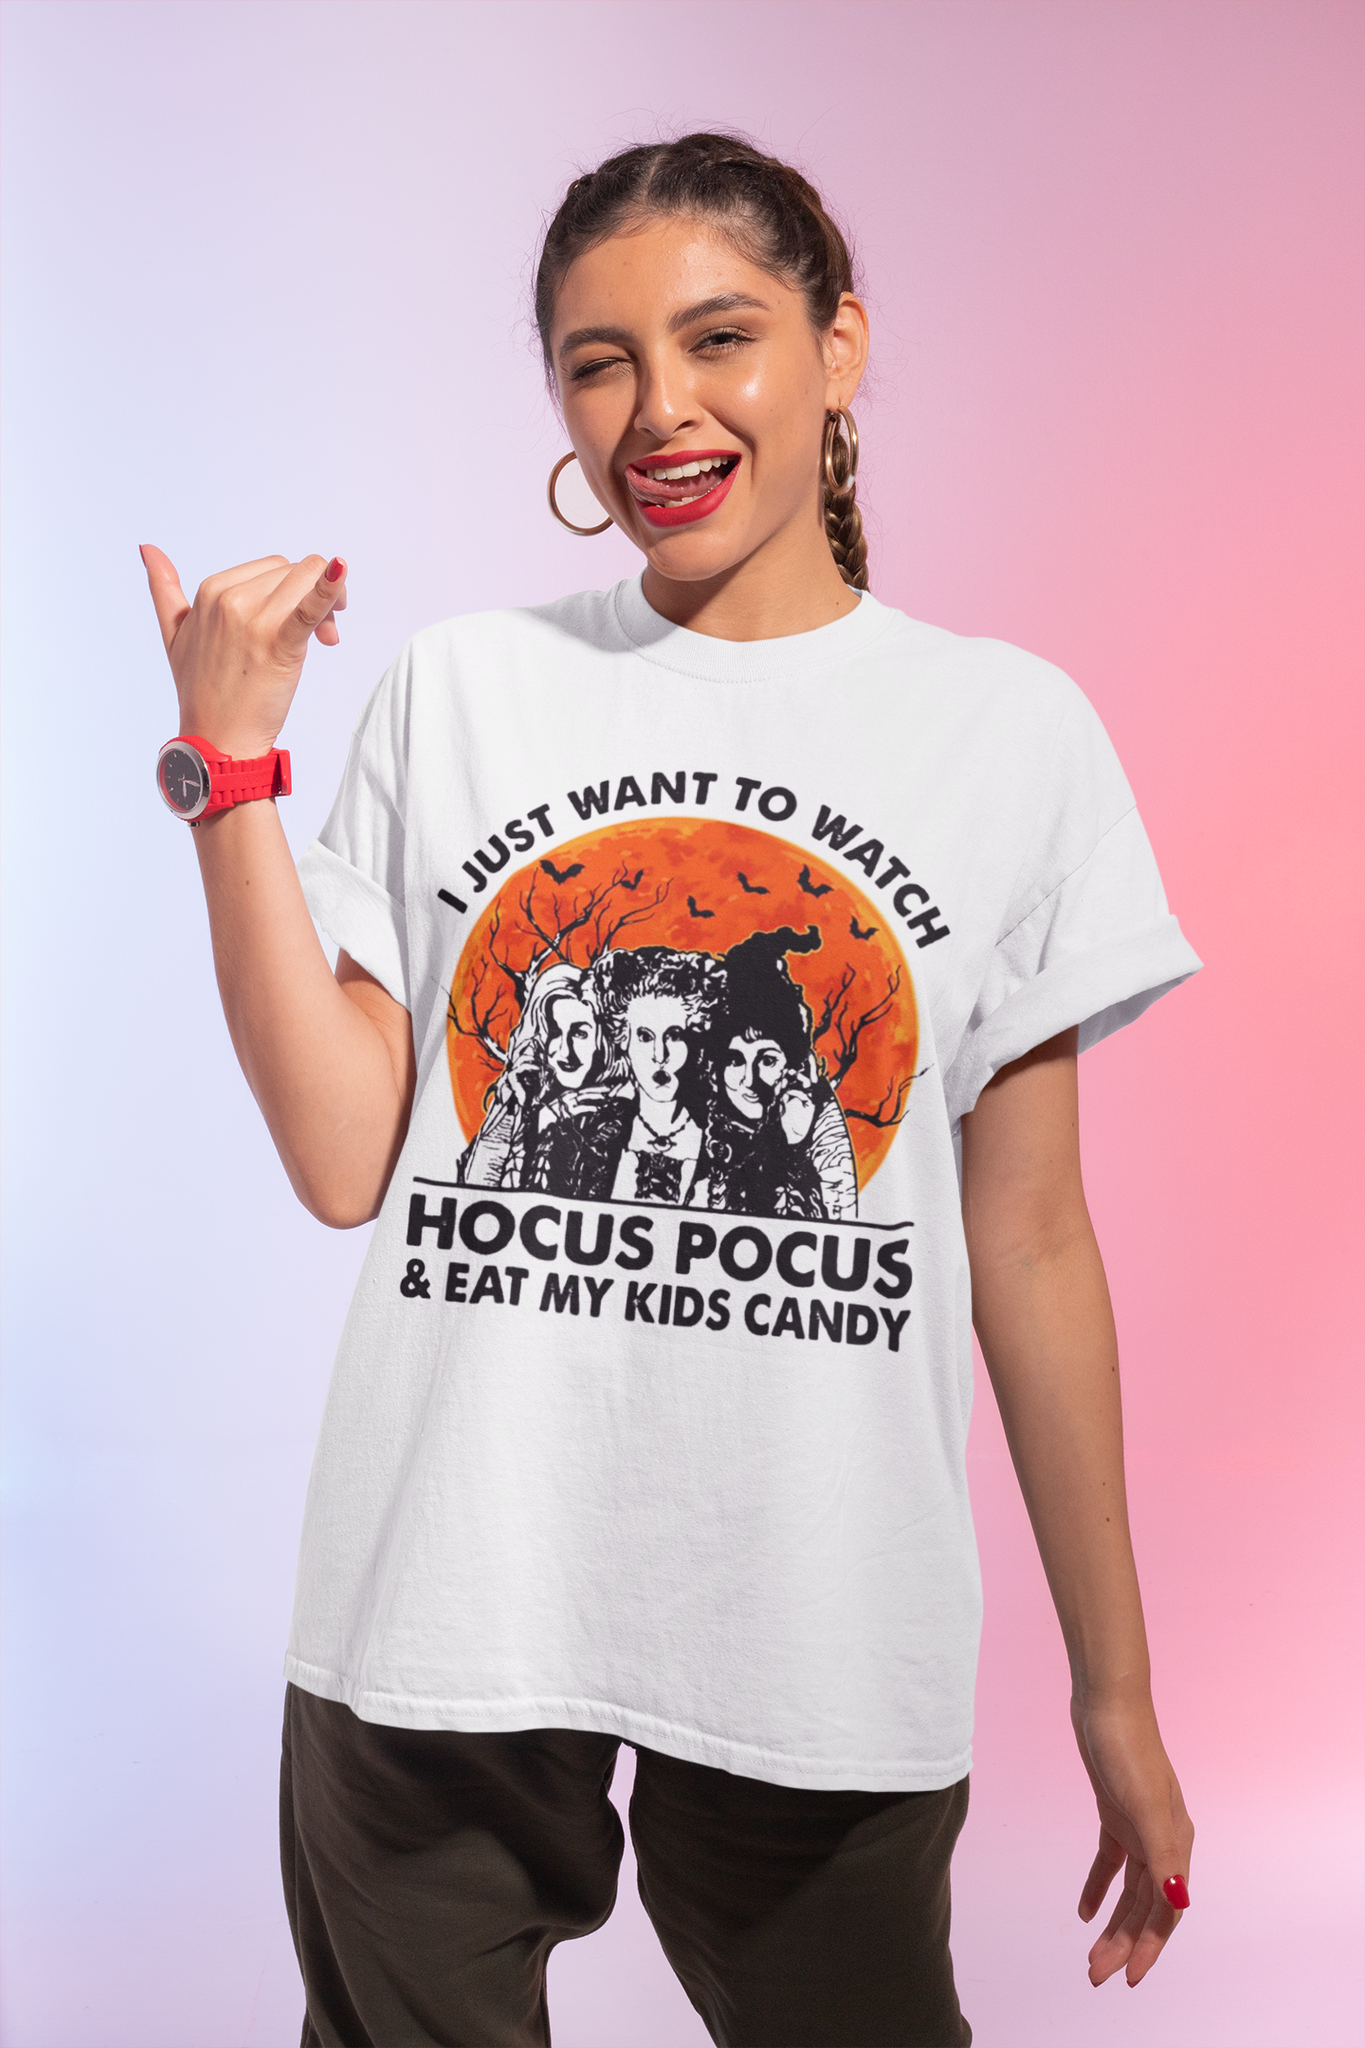 Hocus Pocus T Shirt, I Just Want To Watch Hocus Pocus Shirt, Winifred Mary Sarah Tshirt, Halloween Gifts